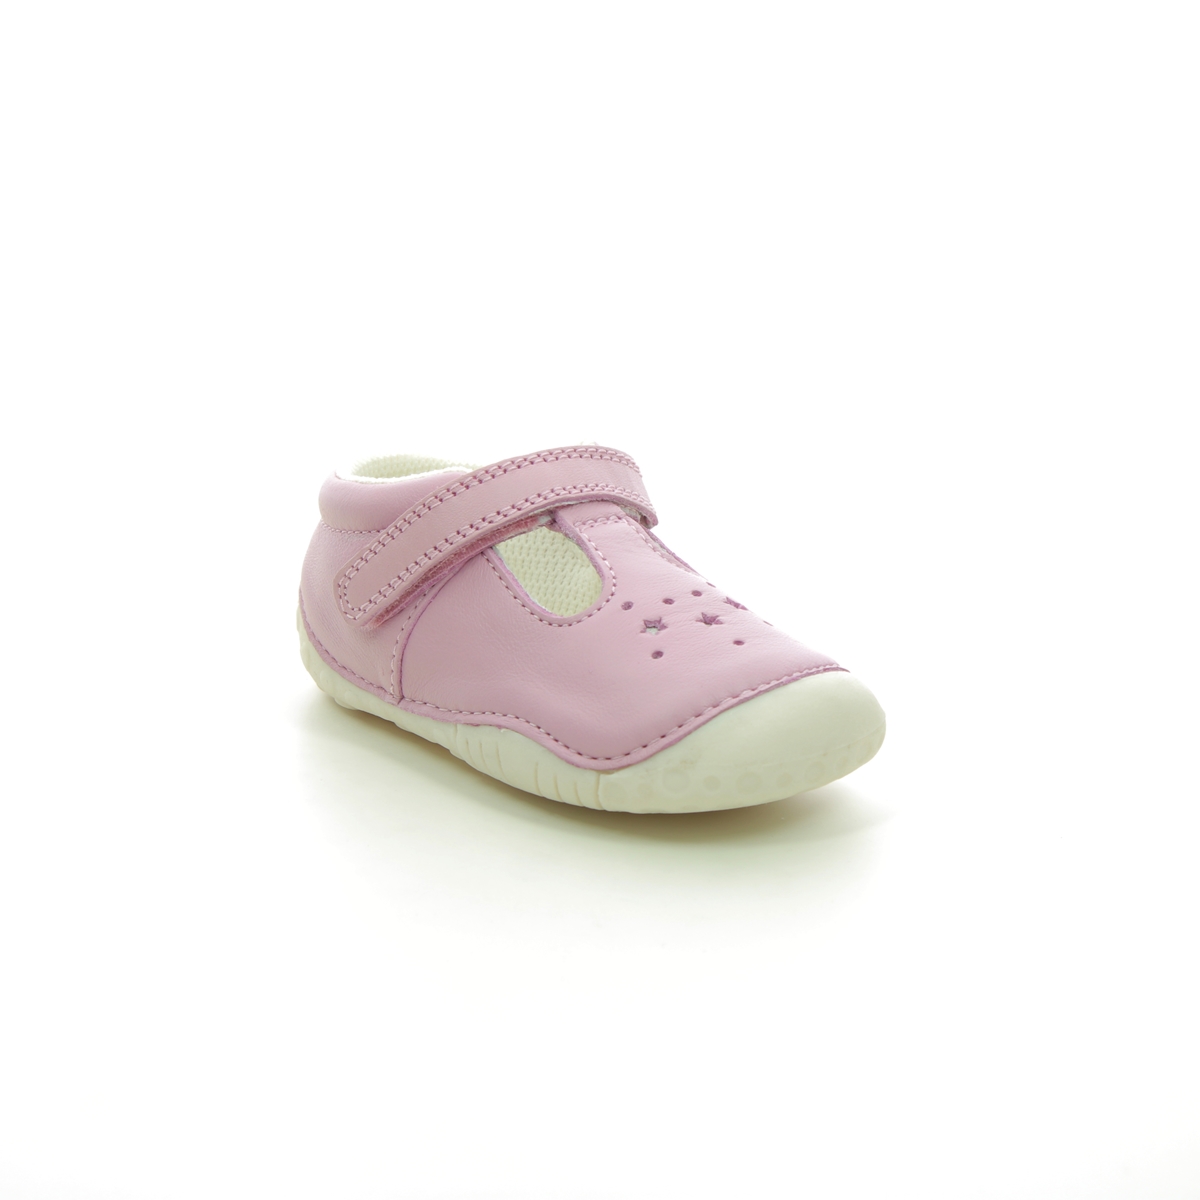 Start Rite - Tumble T Bar In Pink Leather 0761-67G In Size 3 In Plain Pink Leather First And Baby Shoes  In Pink Leather For kids